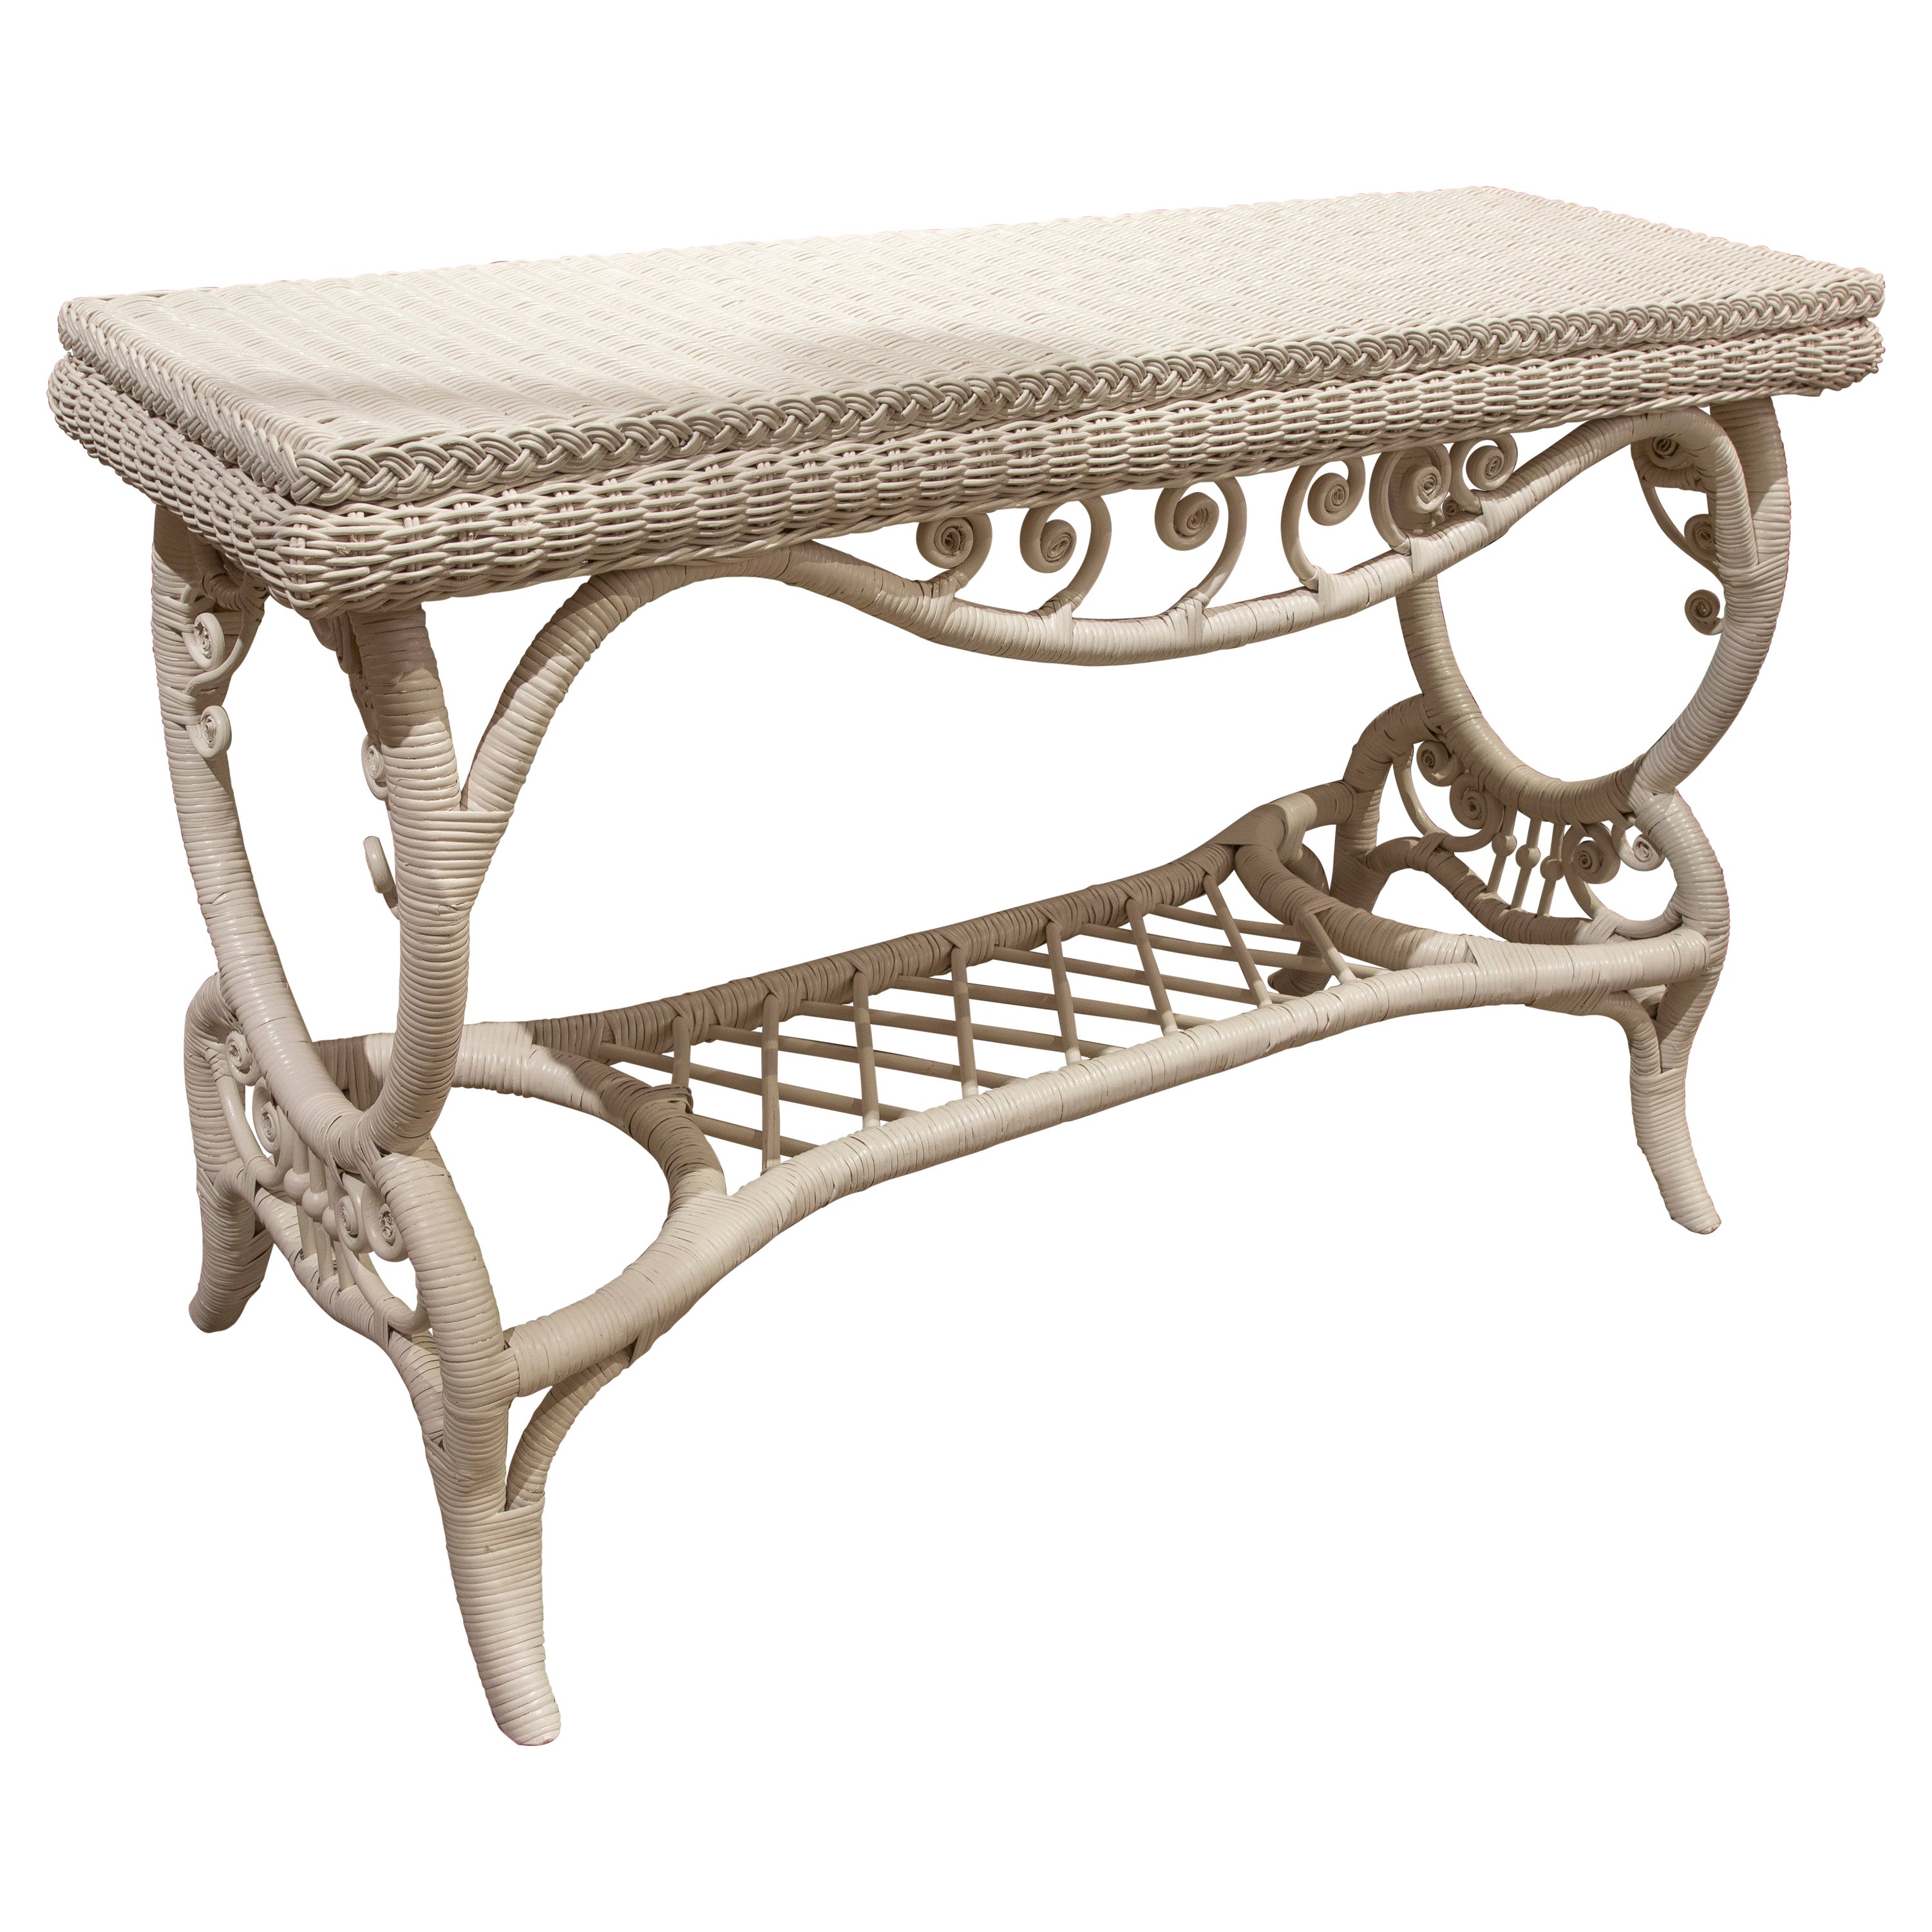 Spanish Handmade Wicker Console Lacquered in White Colour For Sale